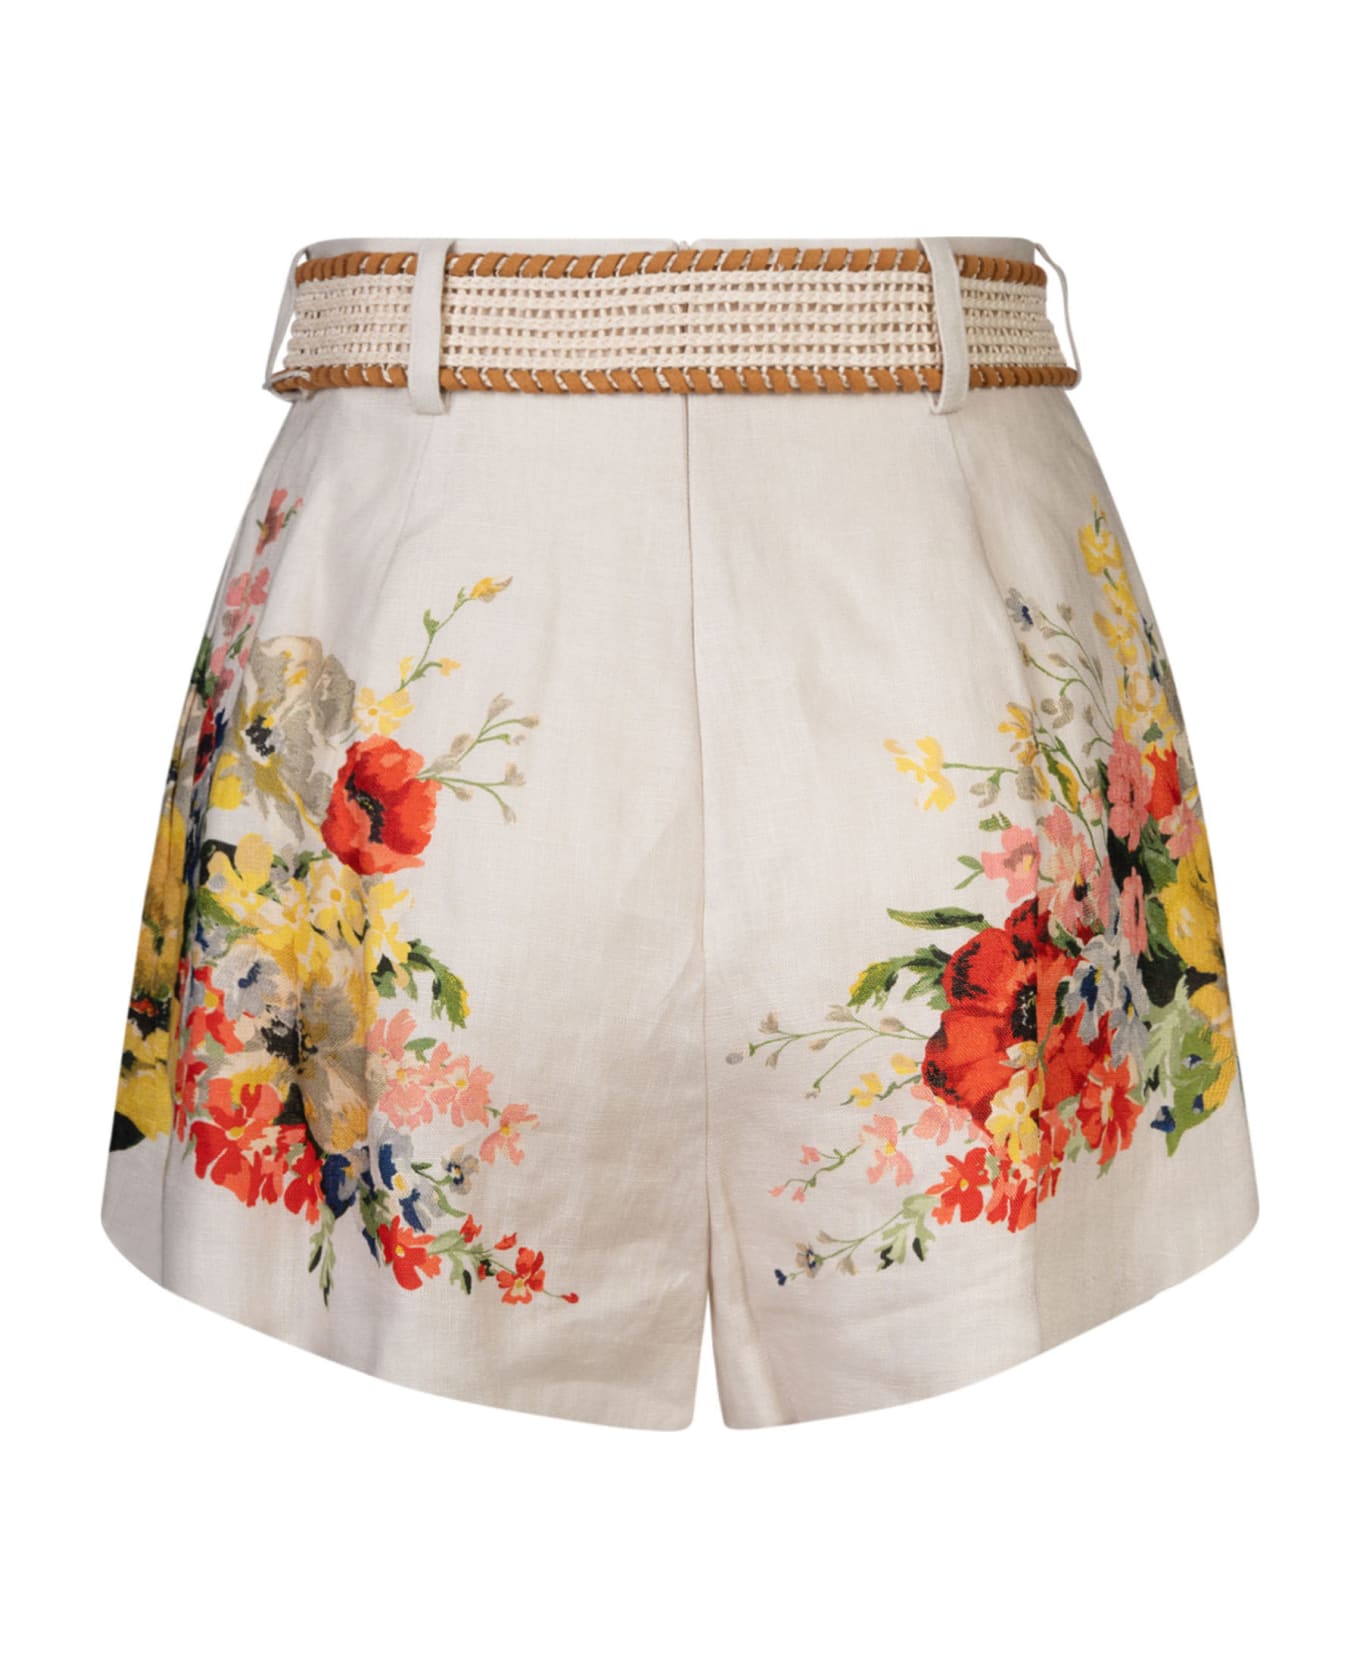 Zimmermann Alight Tuch Shorts - Ivory Floral